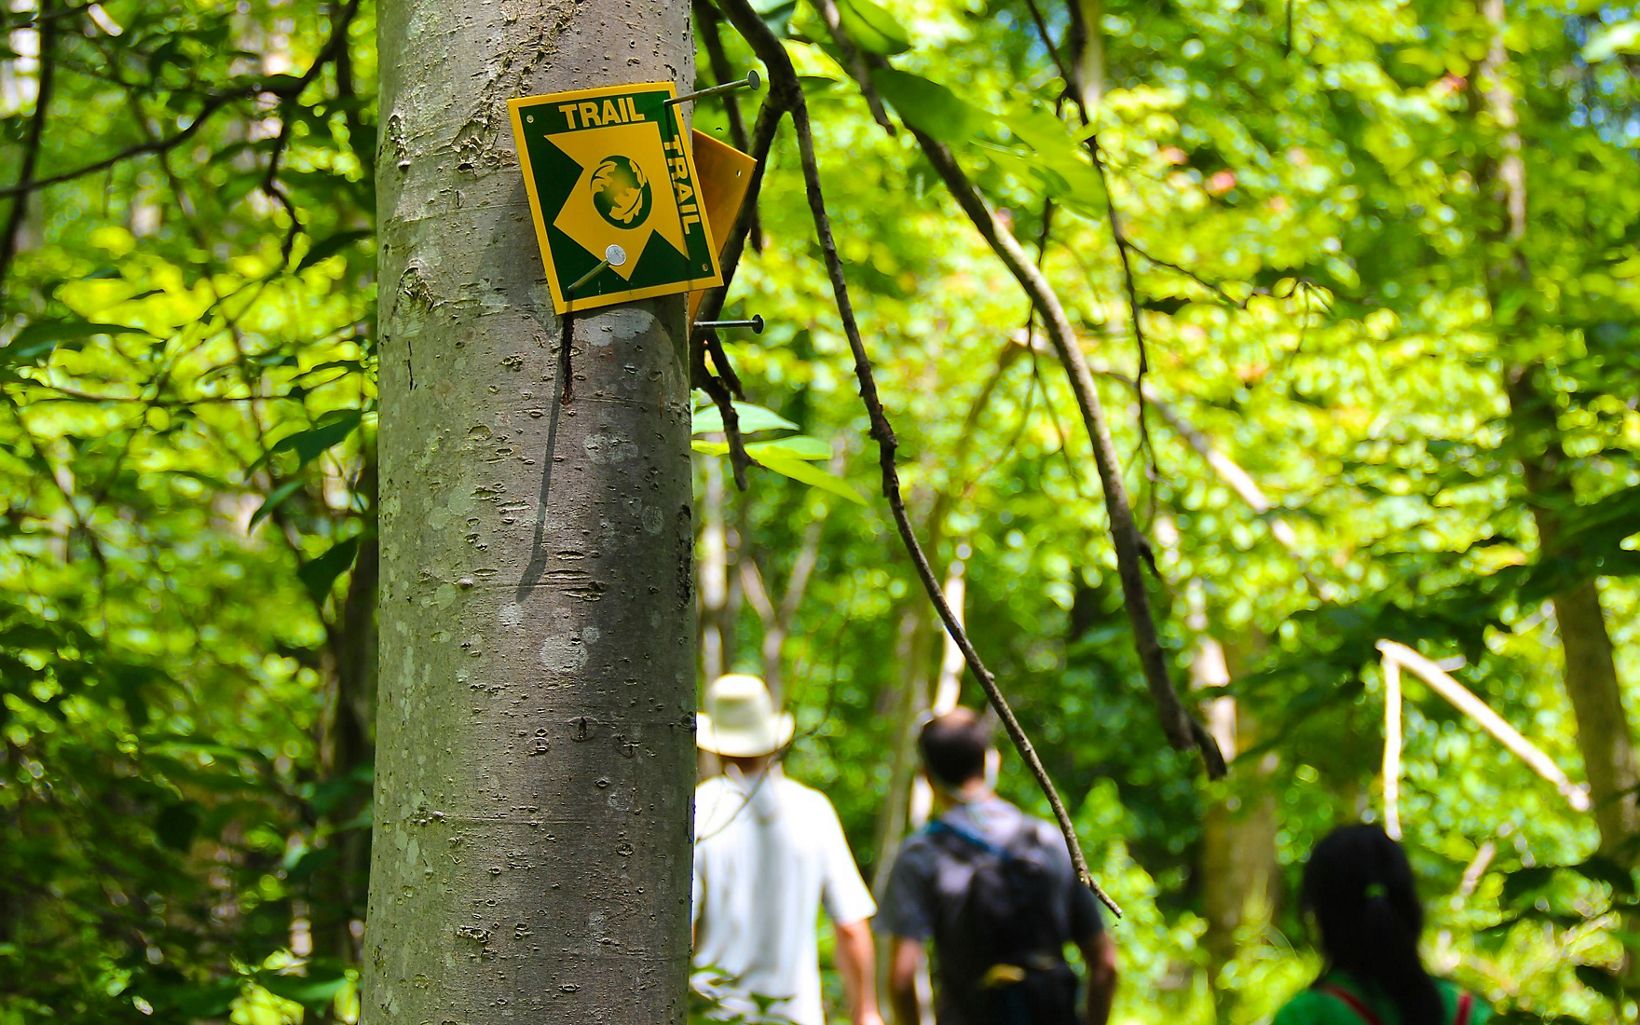 A yellow and green trail blaze is nailed to the trunk of a tree. Three people are walking along the forested trail in the background.